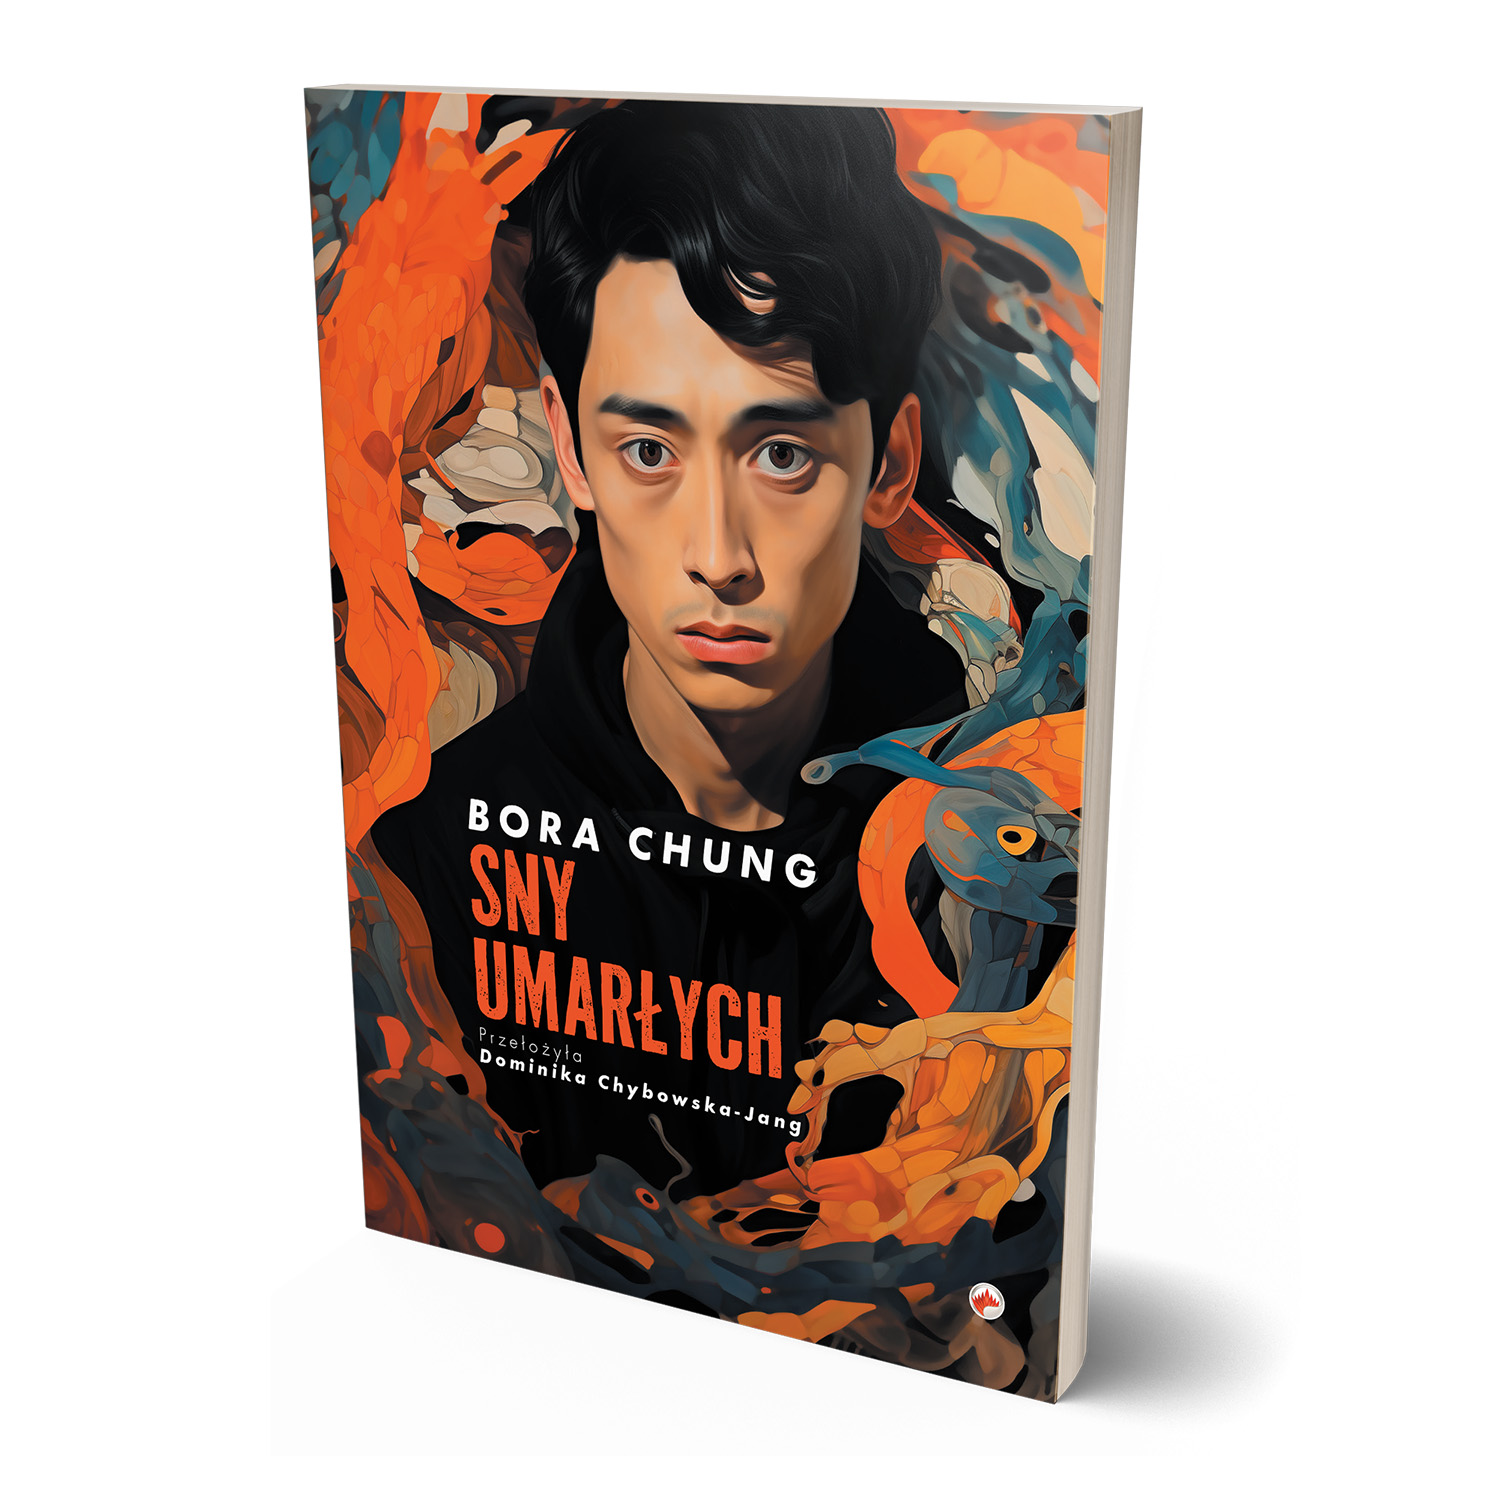 'SNY UMARŁYCH' is the exclusive Polish language release of a science fiction novel by Booker-nominated author Bora Chung. The cover design is Mark Thomas of coverness.com. To find out more about my book design services, please visit www.coverness.com.